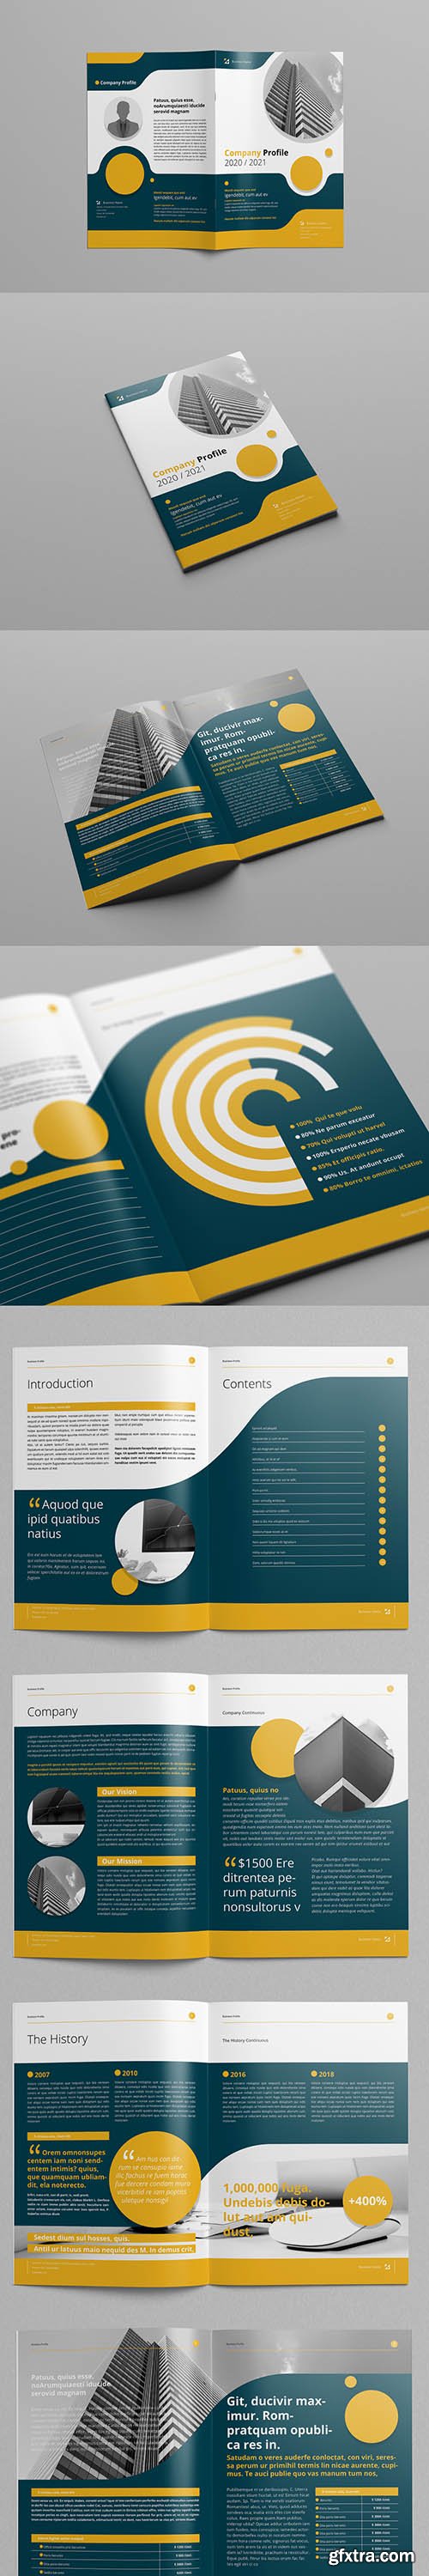 Business Proposal Layout with Yellow and Gray Accents 208112811